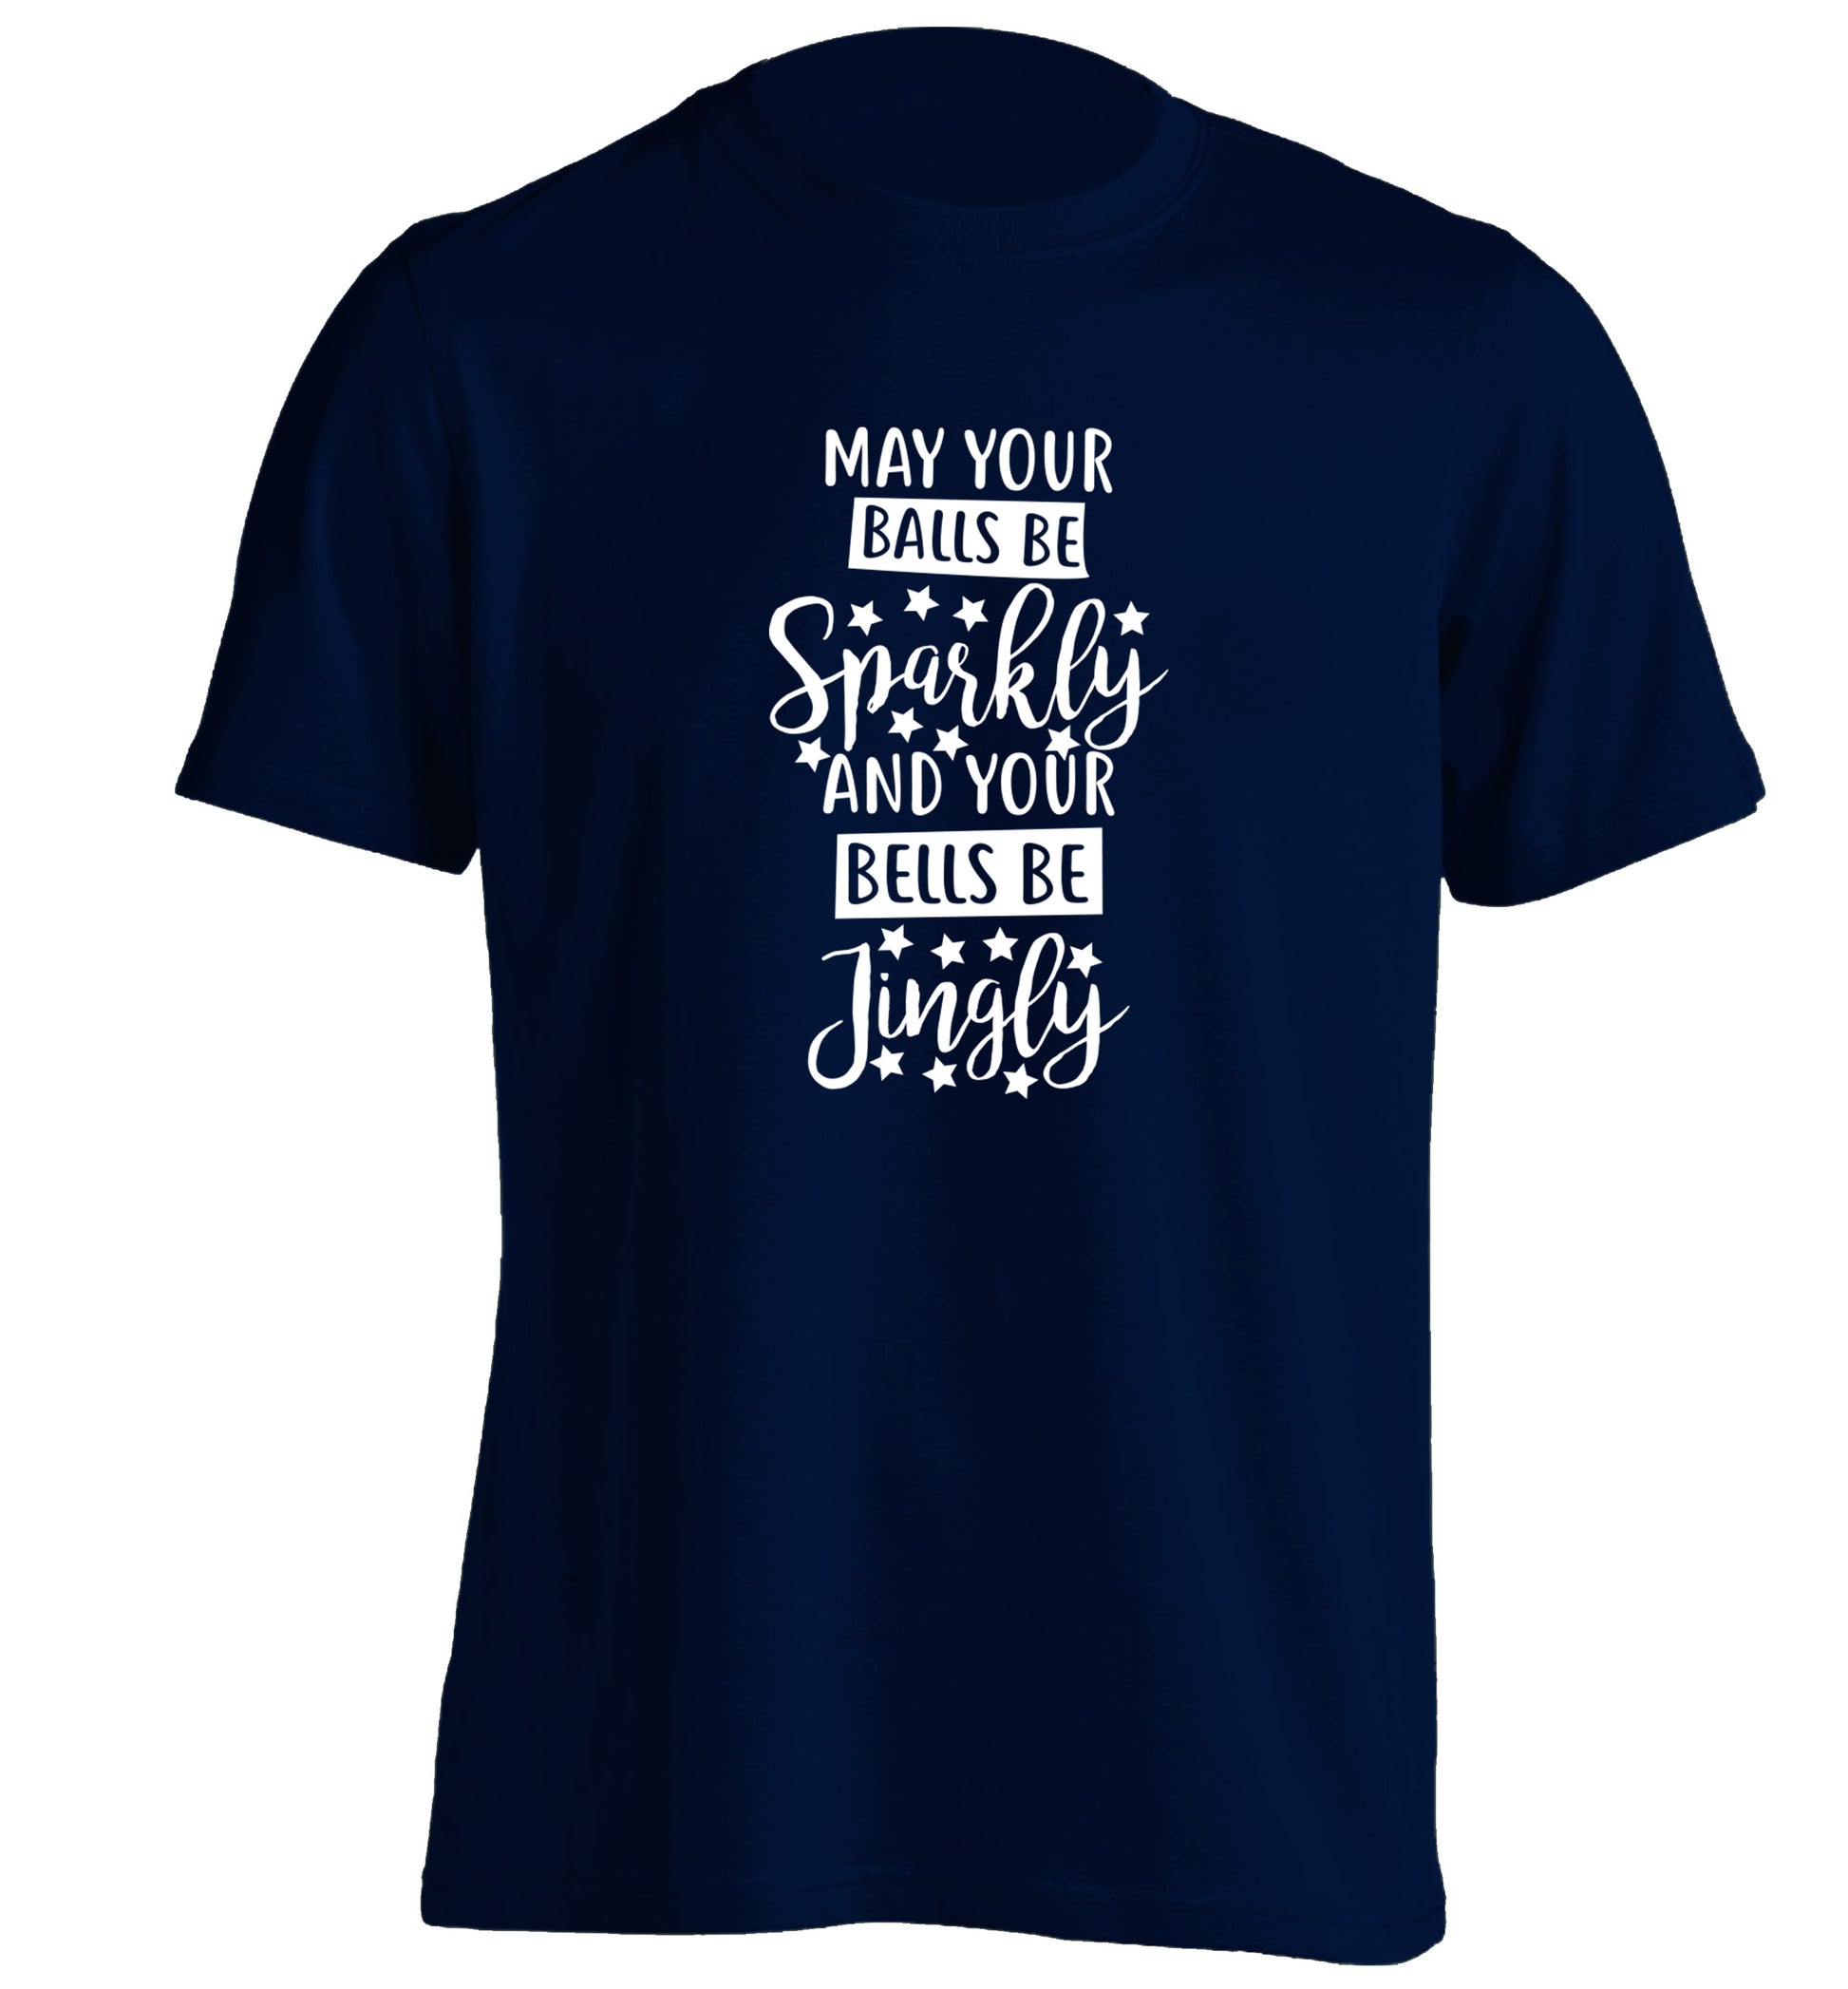 May your balls be sparkly and your bells be jingly adults unisex navy Tshirt 2XL